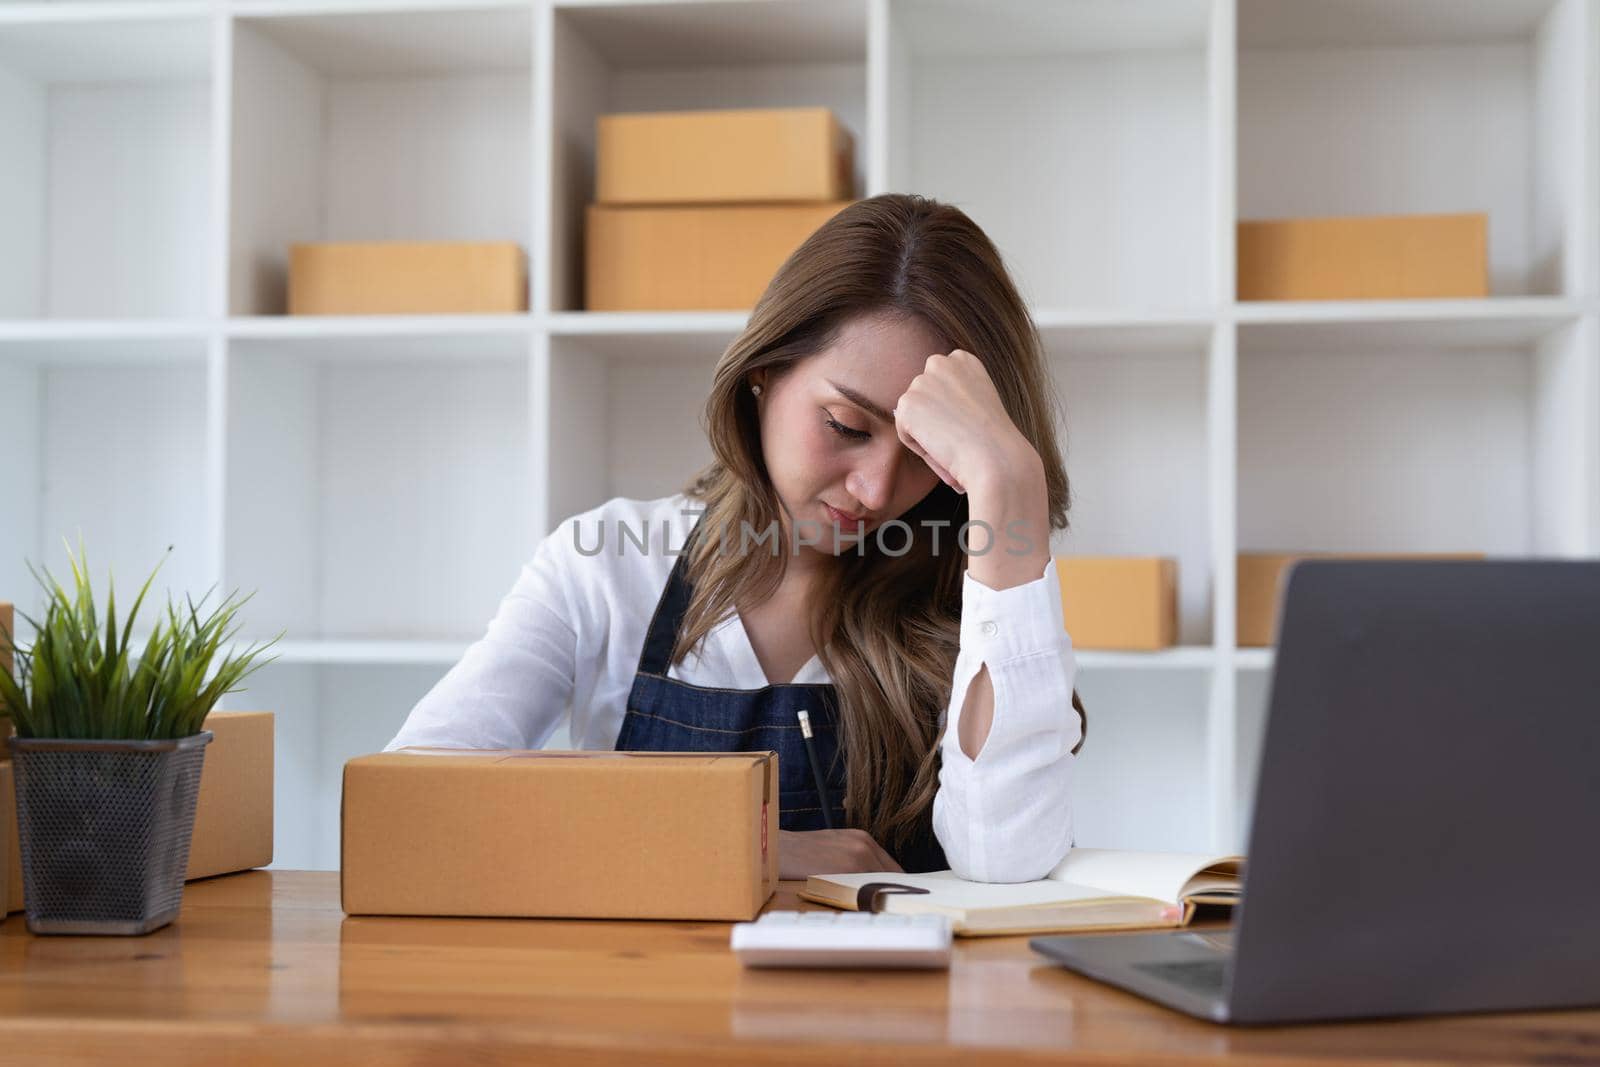 Portrait of a Startup, Small Business, SME Owner, Female Entrepreneur Stressed about falling sales work on parcel boxes Order receipts and checks online. Online SME business concept